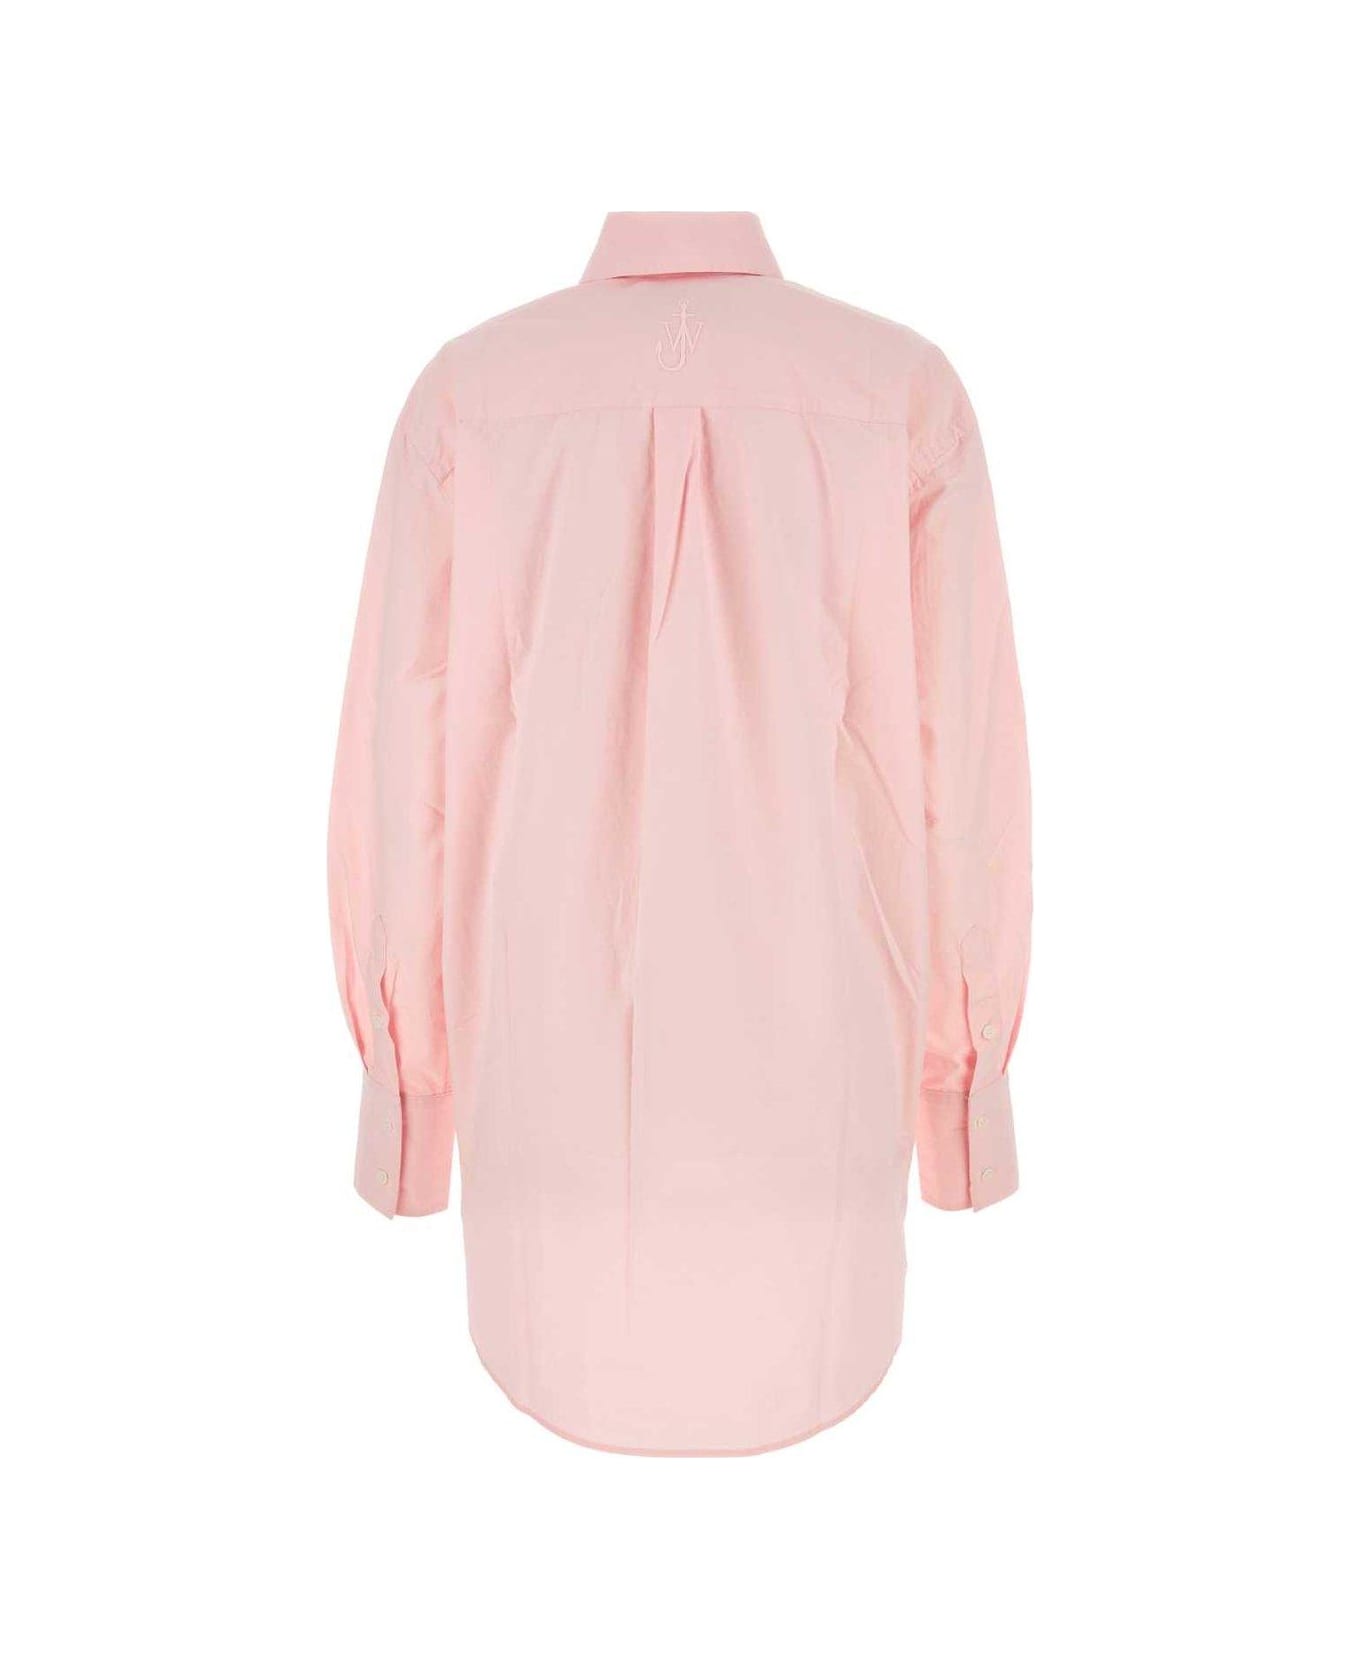 J.W. Anderson Buttoned Oversized Shirt - PINK